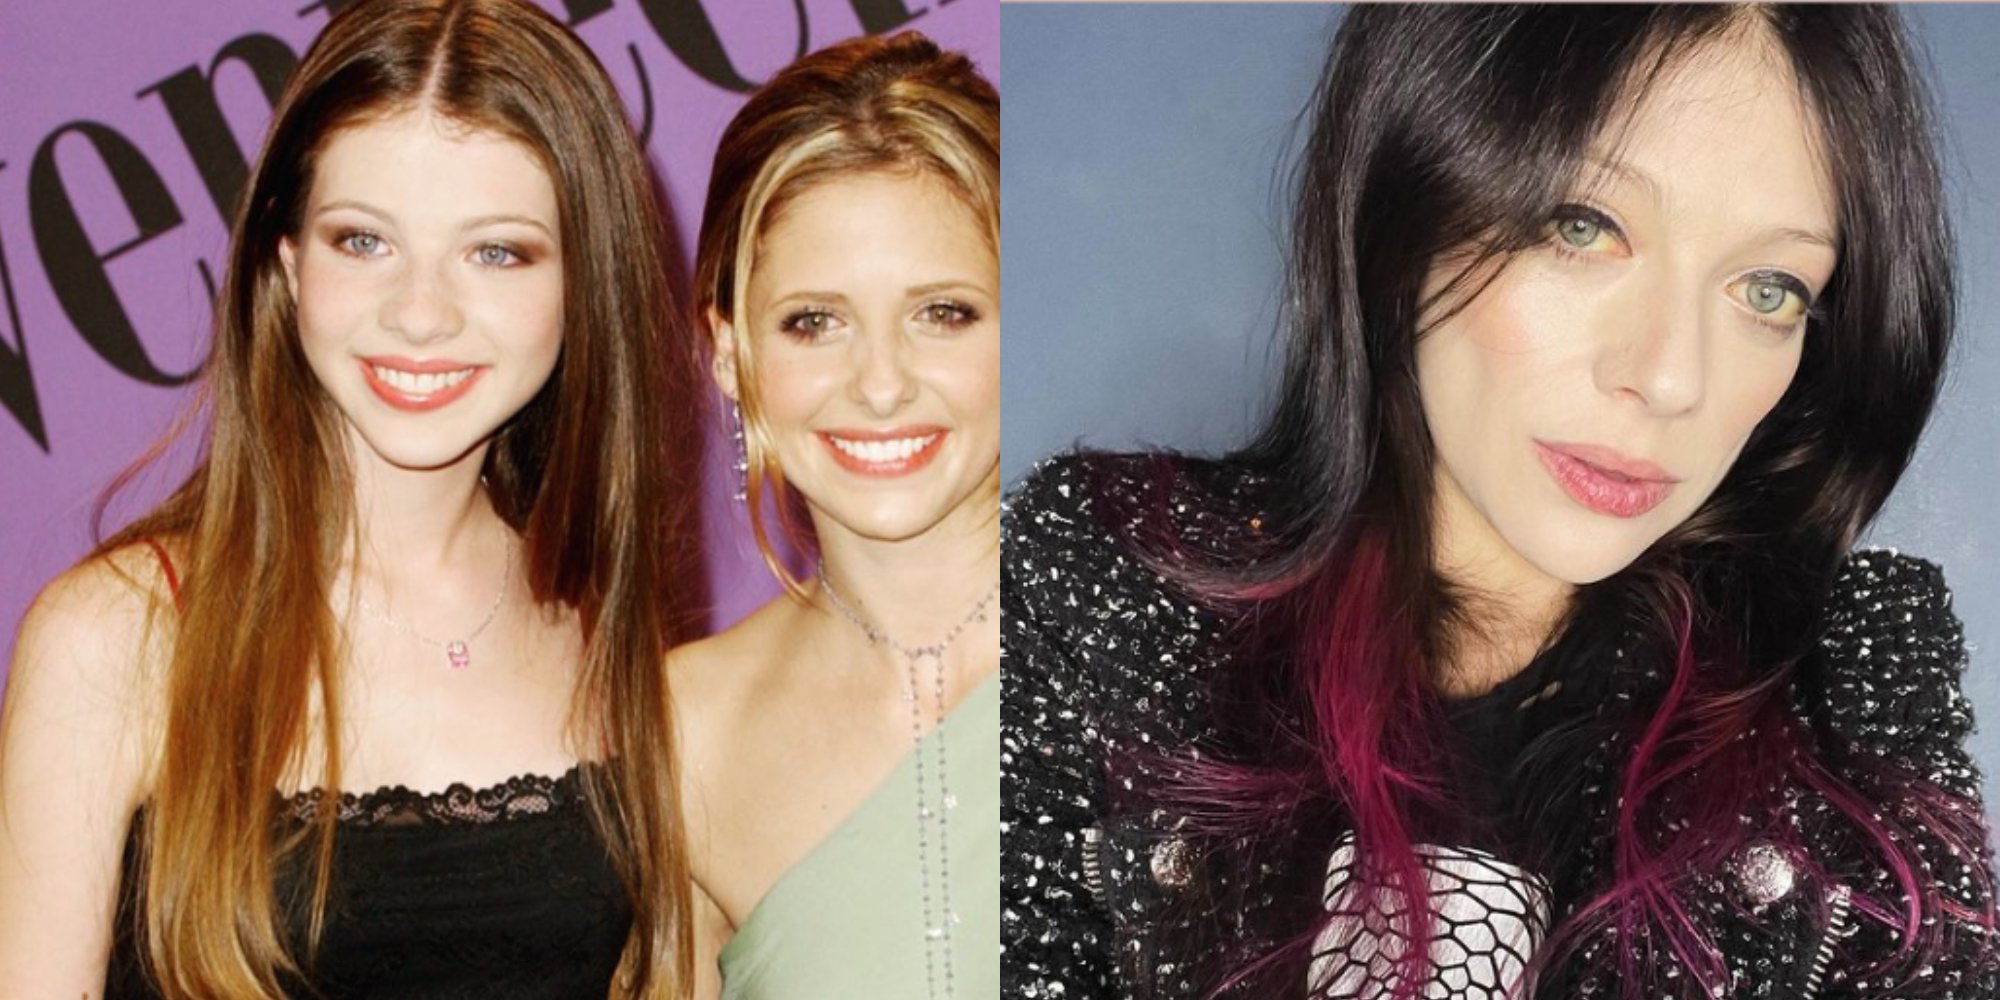 Michelle Trachtenberg Before And After: The Actress' Transformation Over The Years